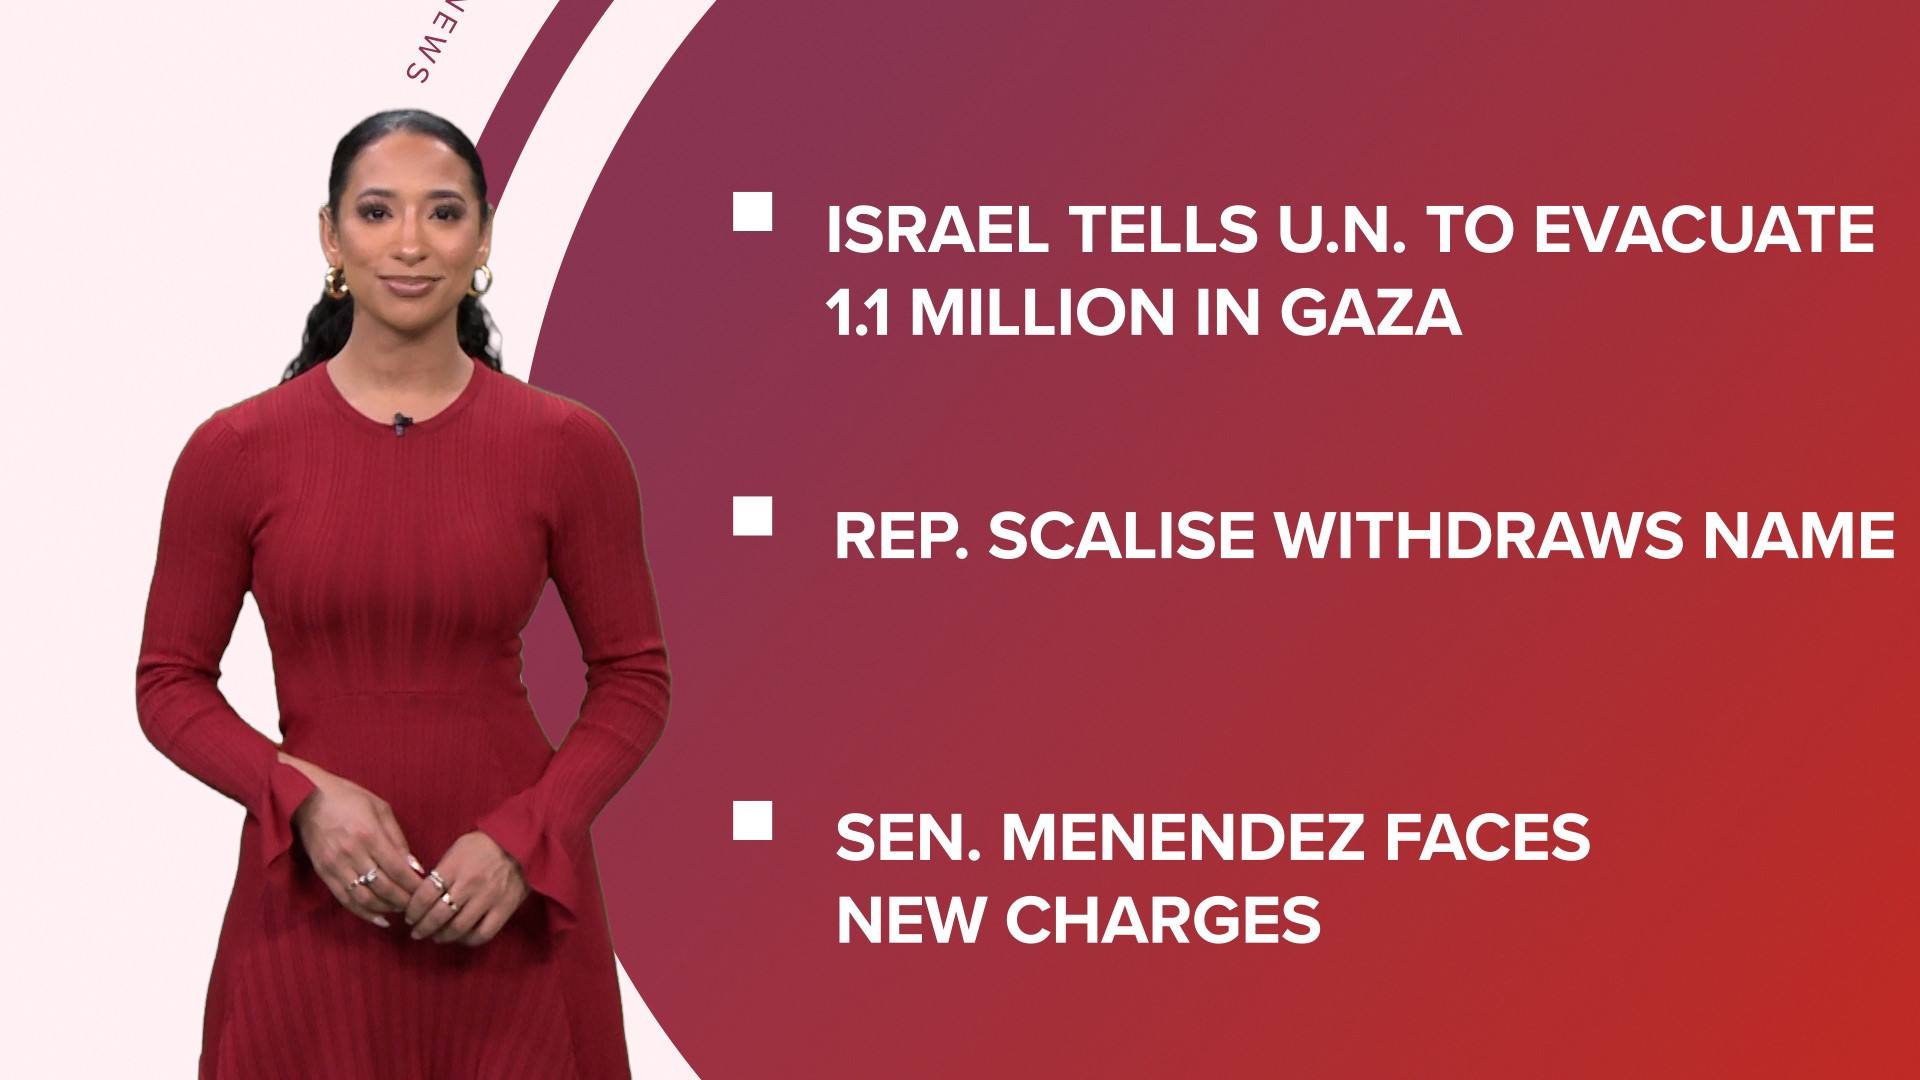 A look at what is happening in the news from the Israel-Hamas war and house speaker chaos to a conviction and acquittal in the death of Elijah McClain.